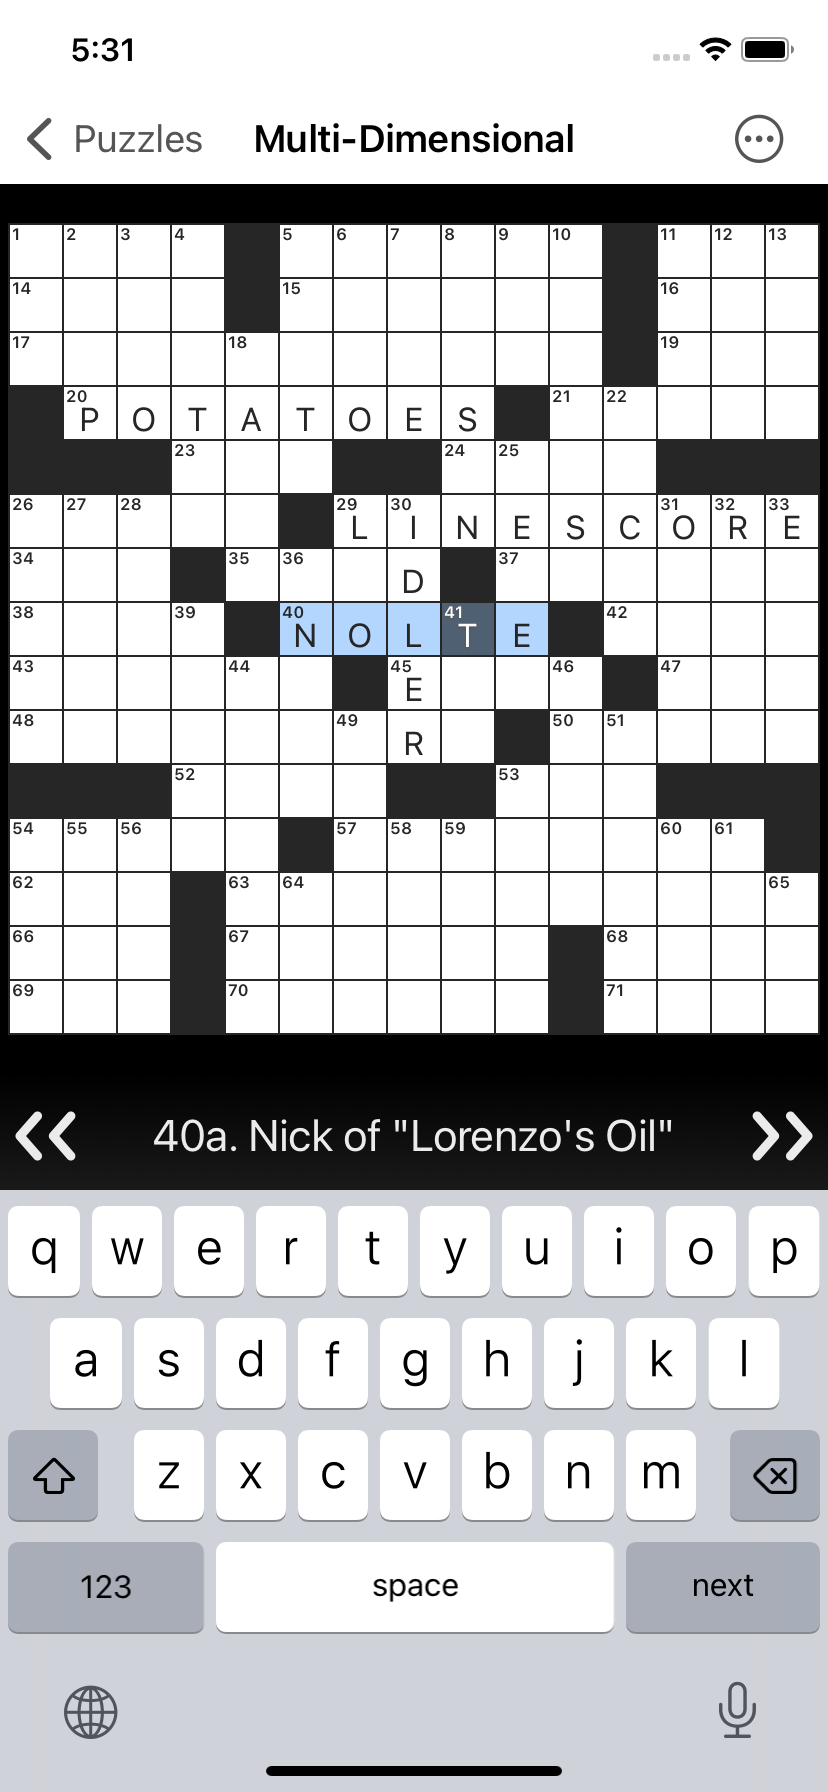 Screenshot of Black Ink crossword app for iOS, showing a crossword grid with some answers filled, the standard iOS keyboard, and a clue navigator.